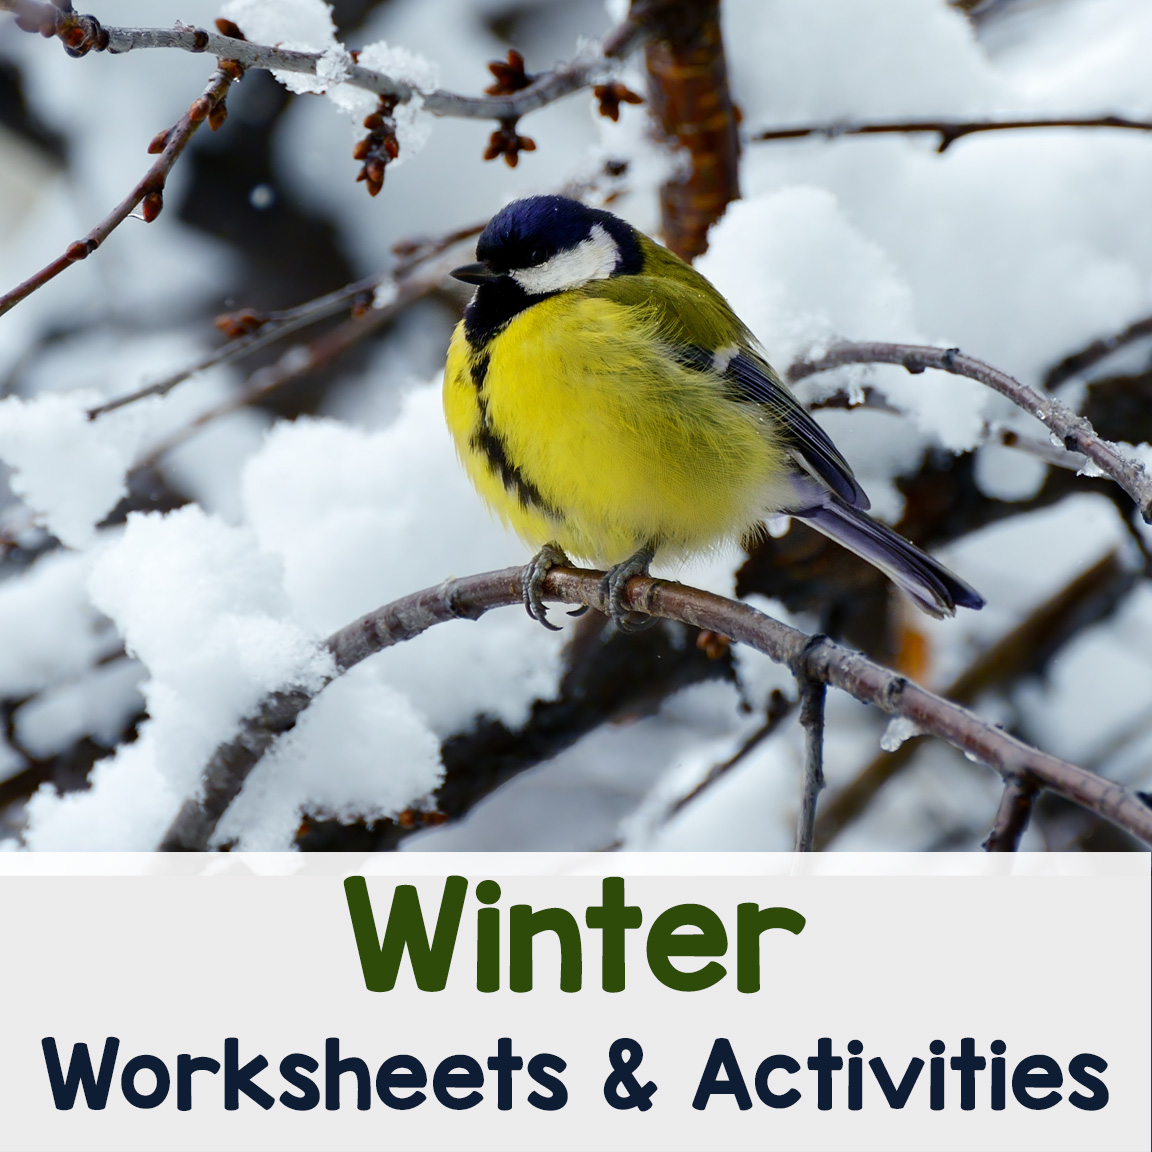 Winter Worksheets and Activities